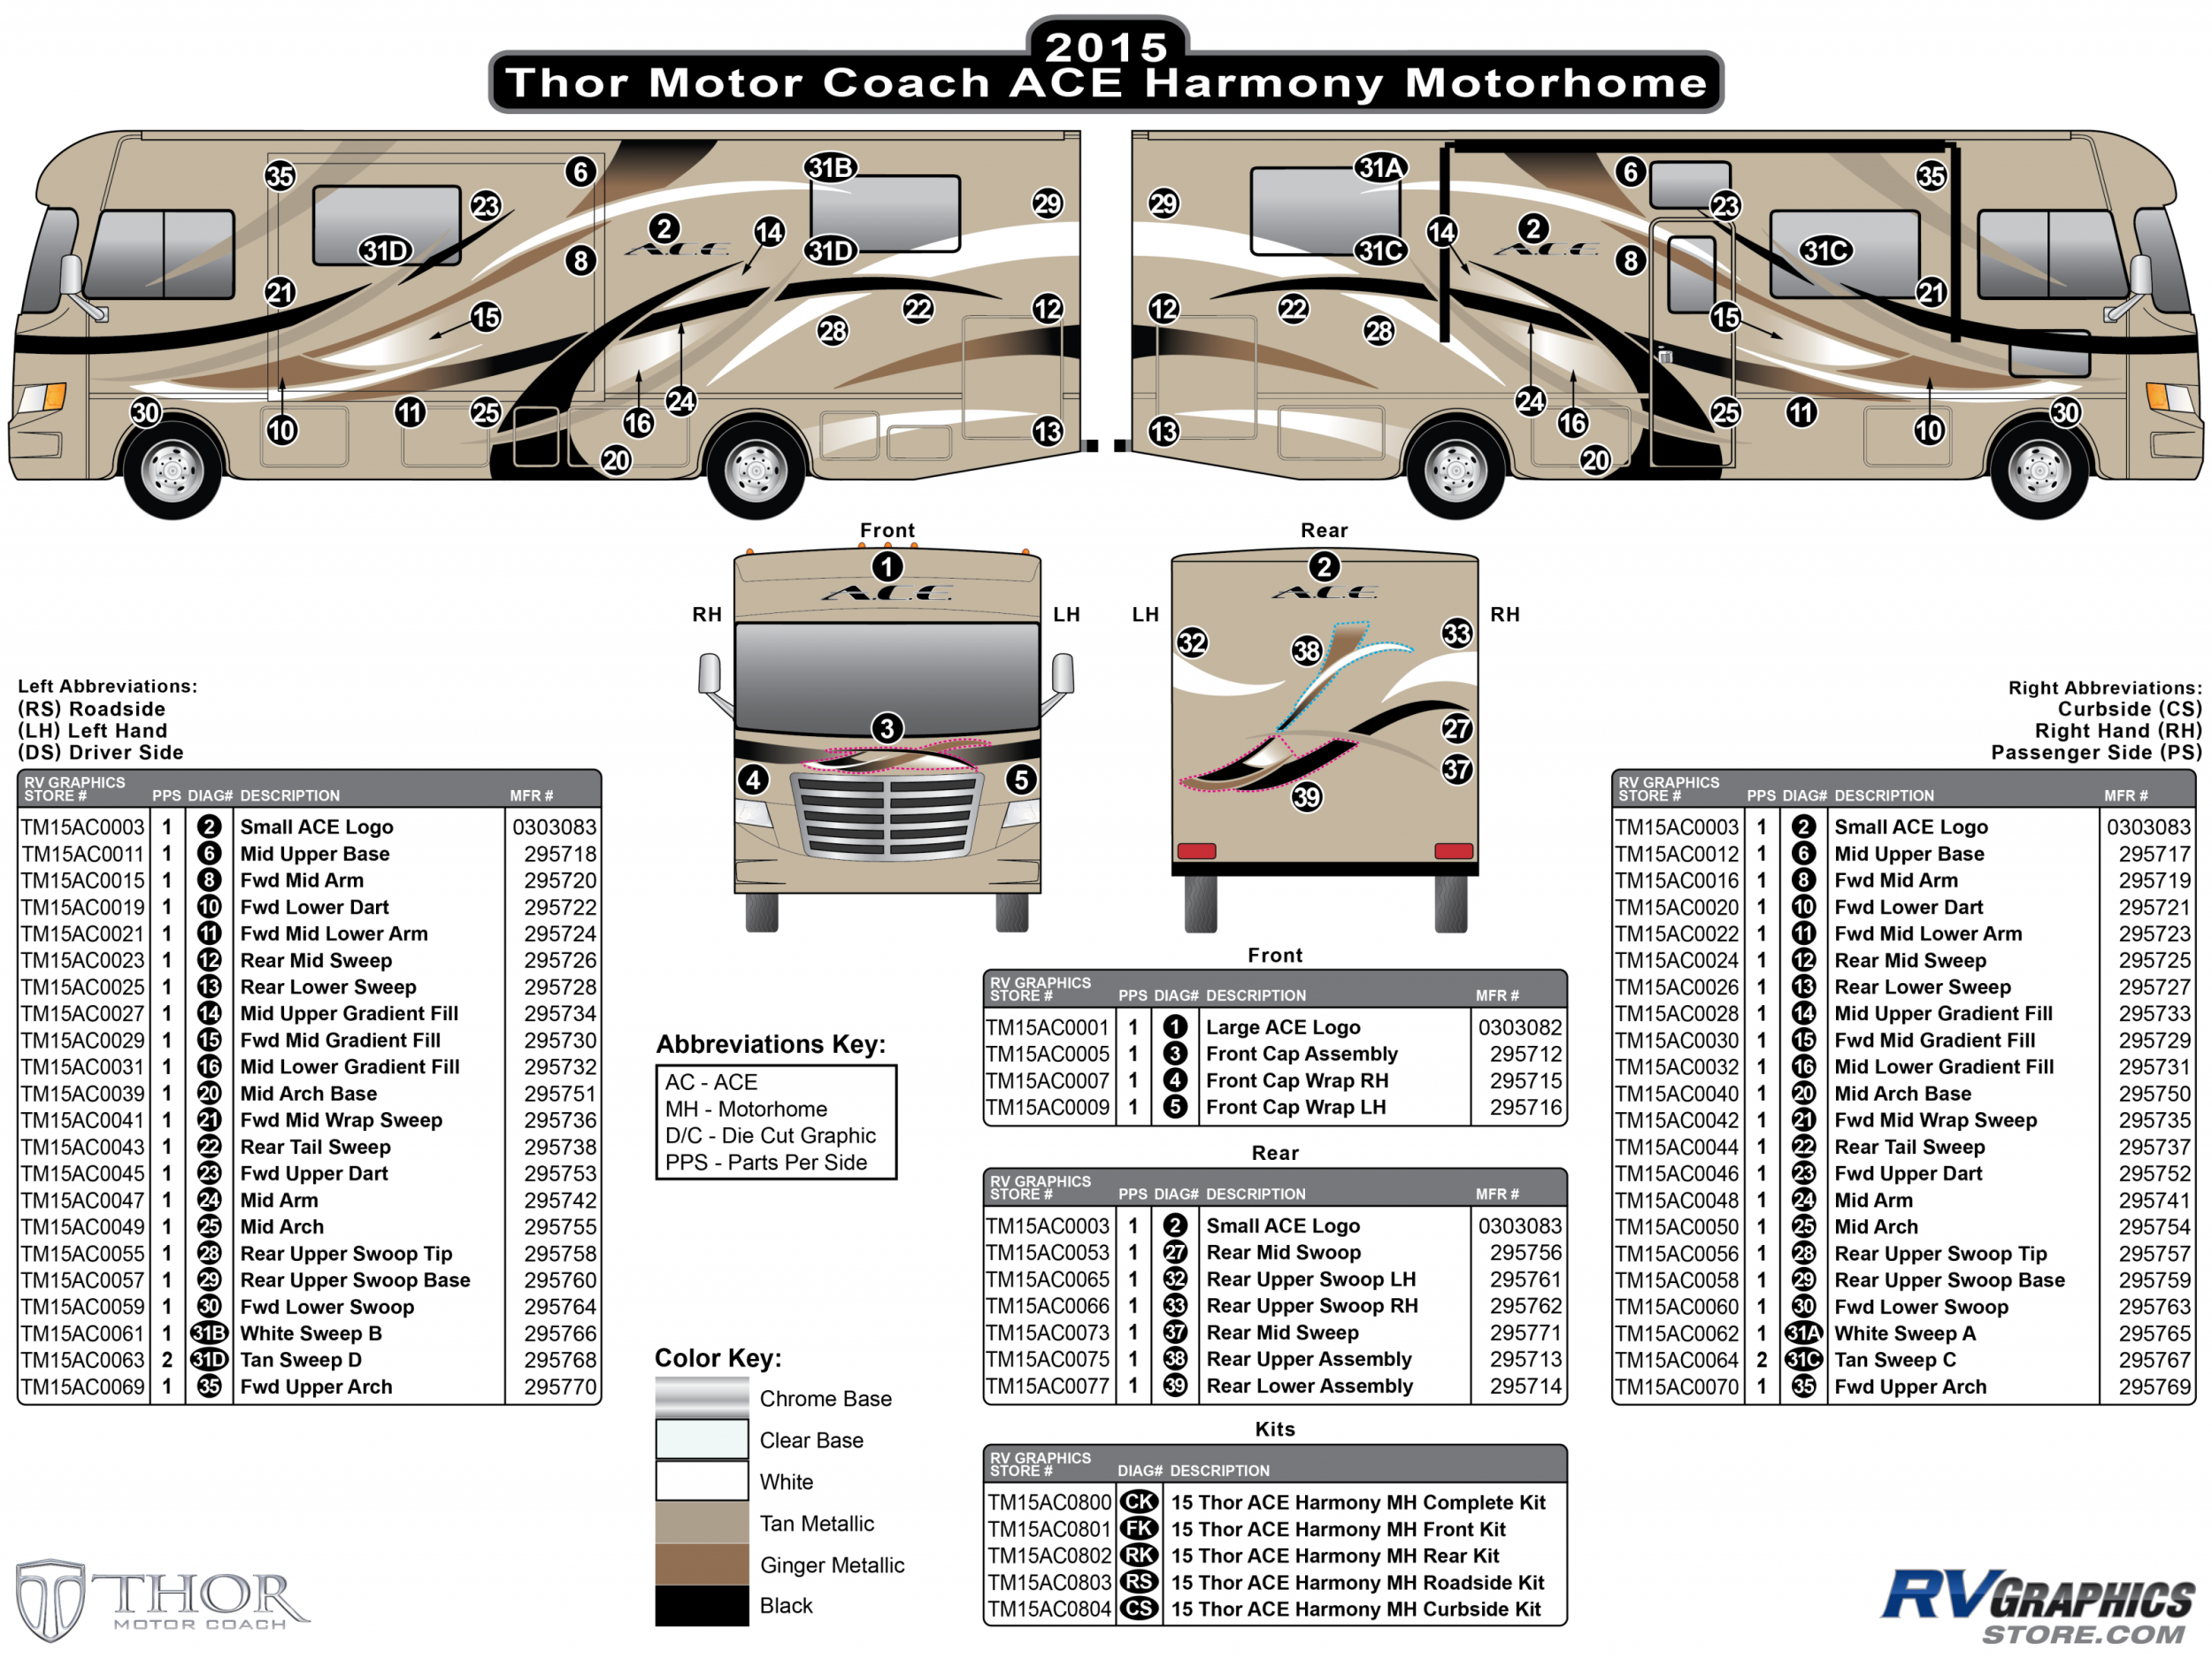 ACE - 2015-2016 ACE MH-Motorhome Harmony (Gold) Version